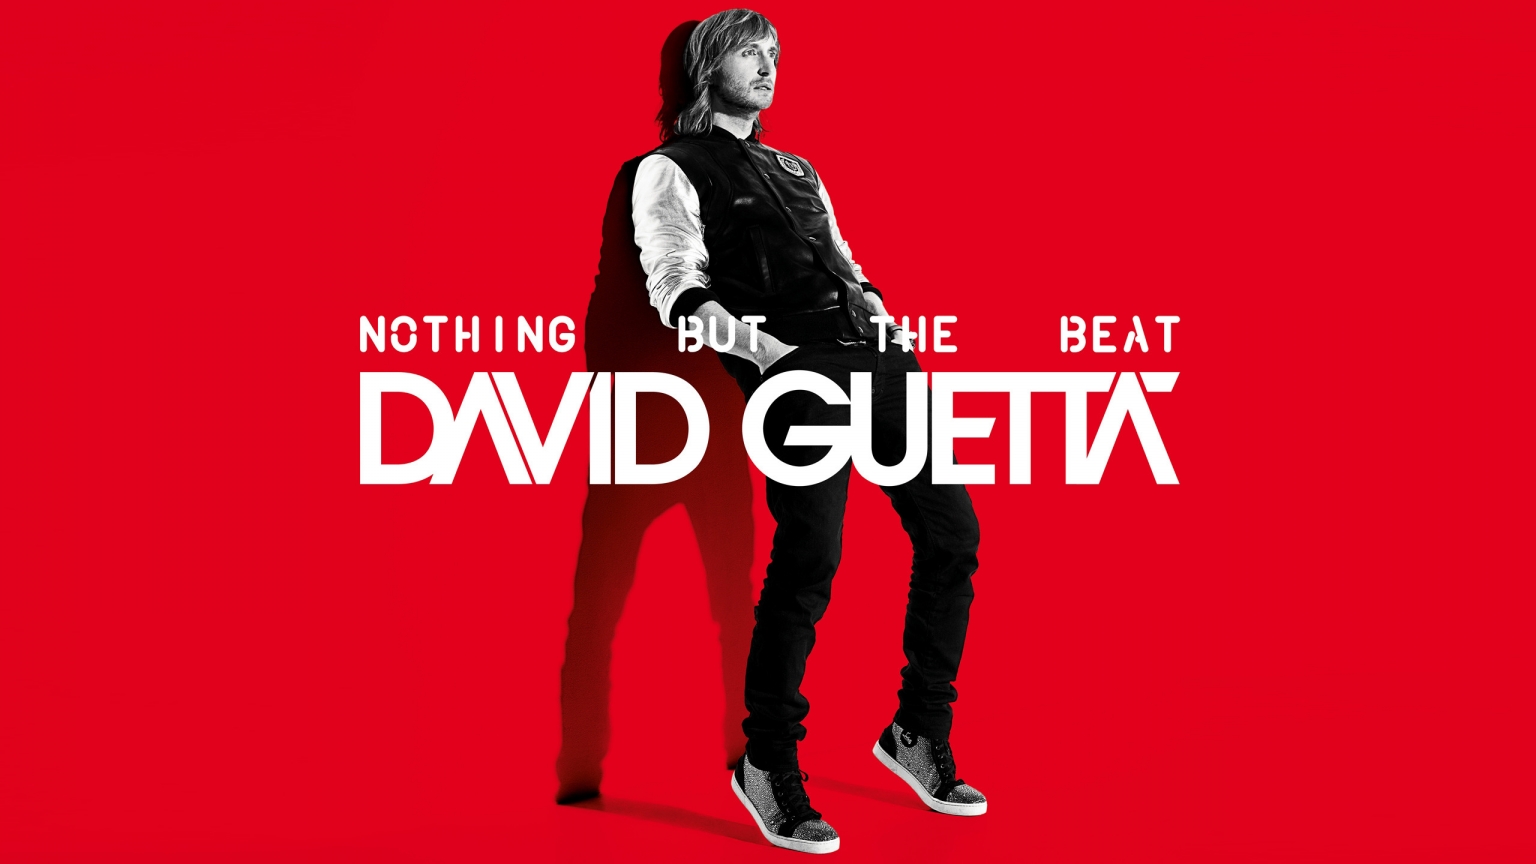 David Guetta Nothing But the Beat for 1536 x 864 HDTV resolution